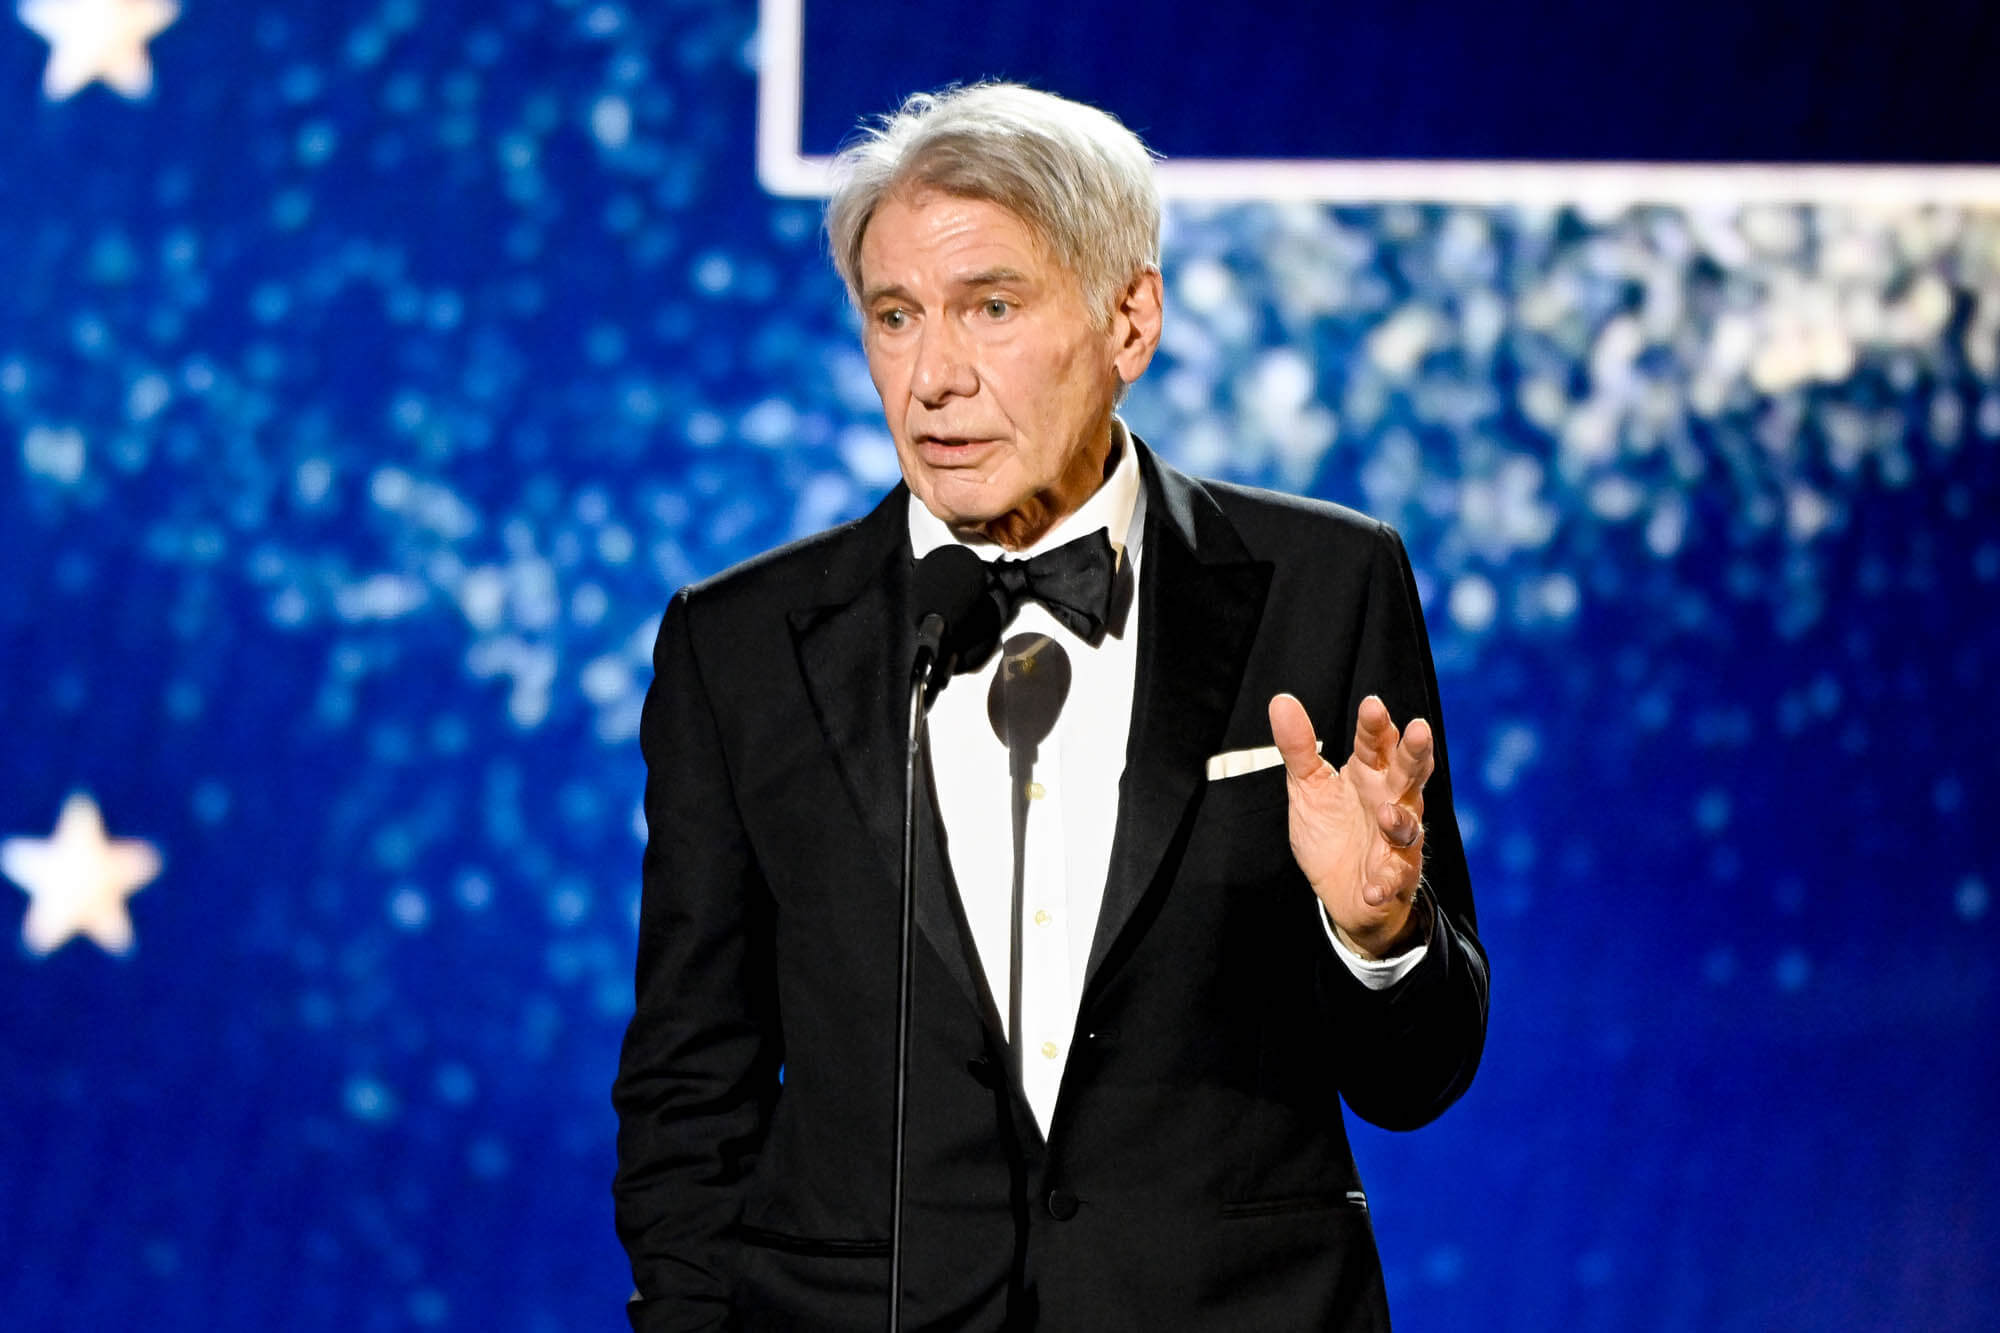 Harrison Ford was not grumpy at the Critics Choice Awards and What Else